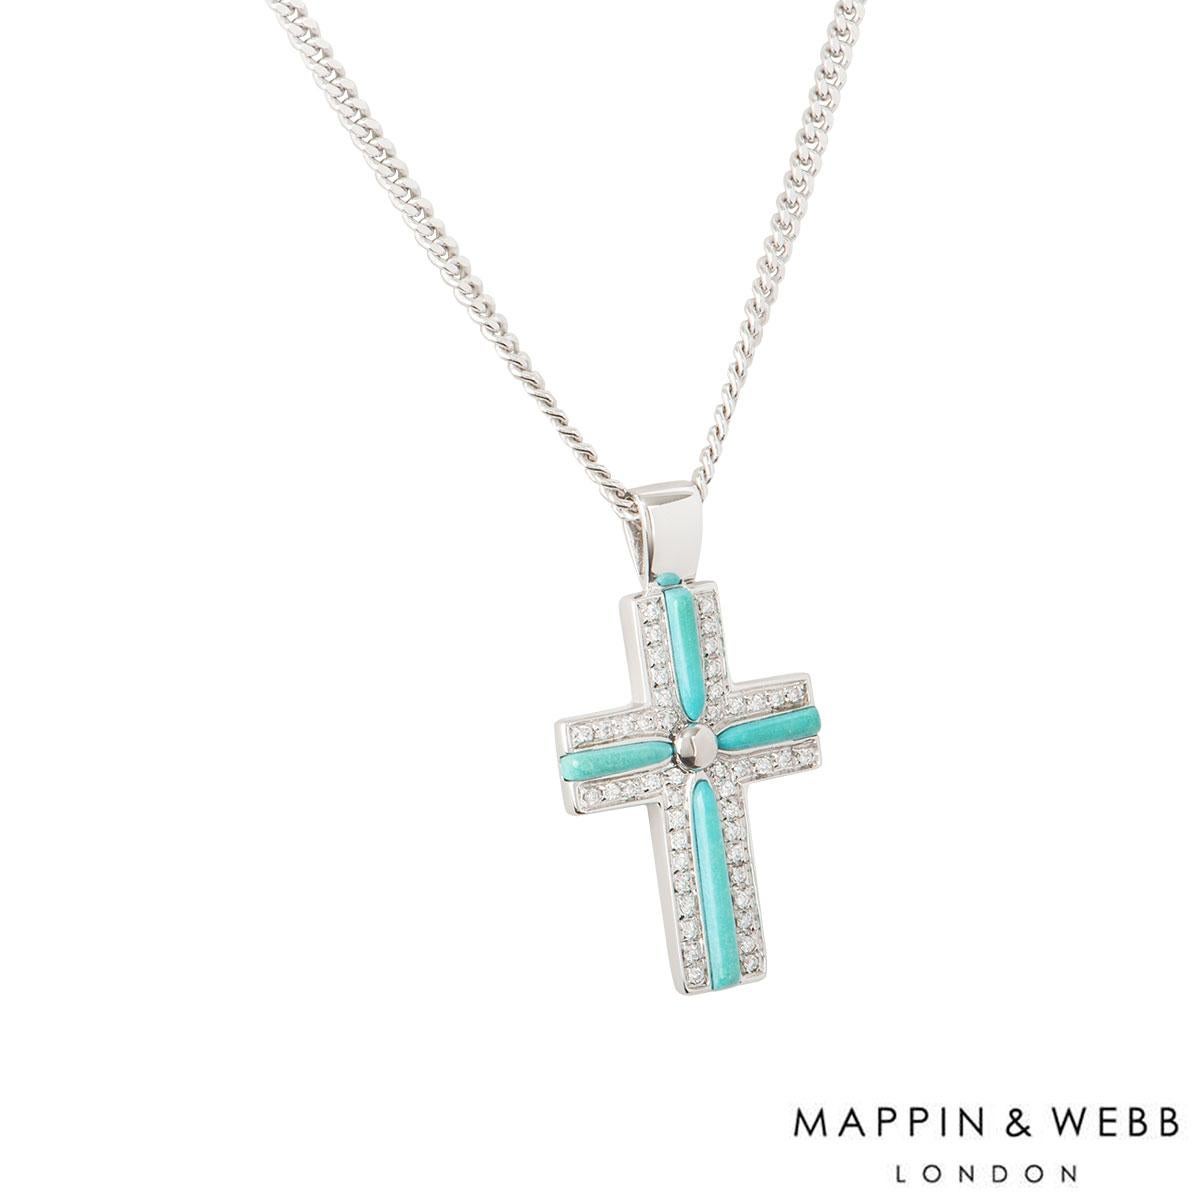 An 18k white gold diamond cross pendant by Mappin & Webb. The cross pendant consists of turquoise lines through the middle of the cross with 48 round brilliant cut diamonds on the sides totalling approximately 0.48ct. The pendant is on a loop bail